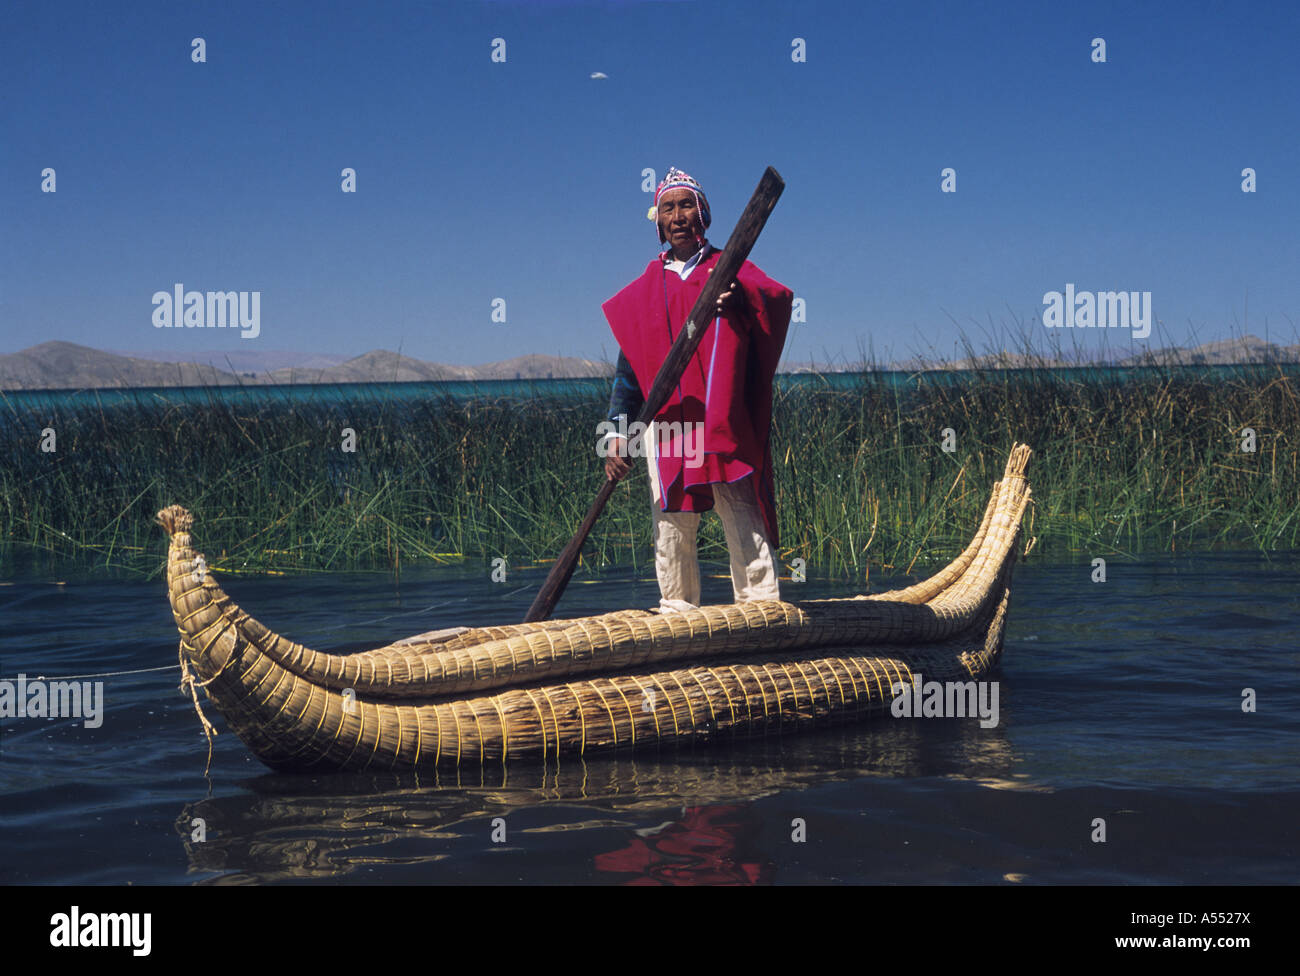 Paulino Esteban (a well known reed boat builder) standing on a totora reed boat wearing traditional dress, Lake Titicaca, Bolivia Stock Photo